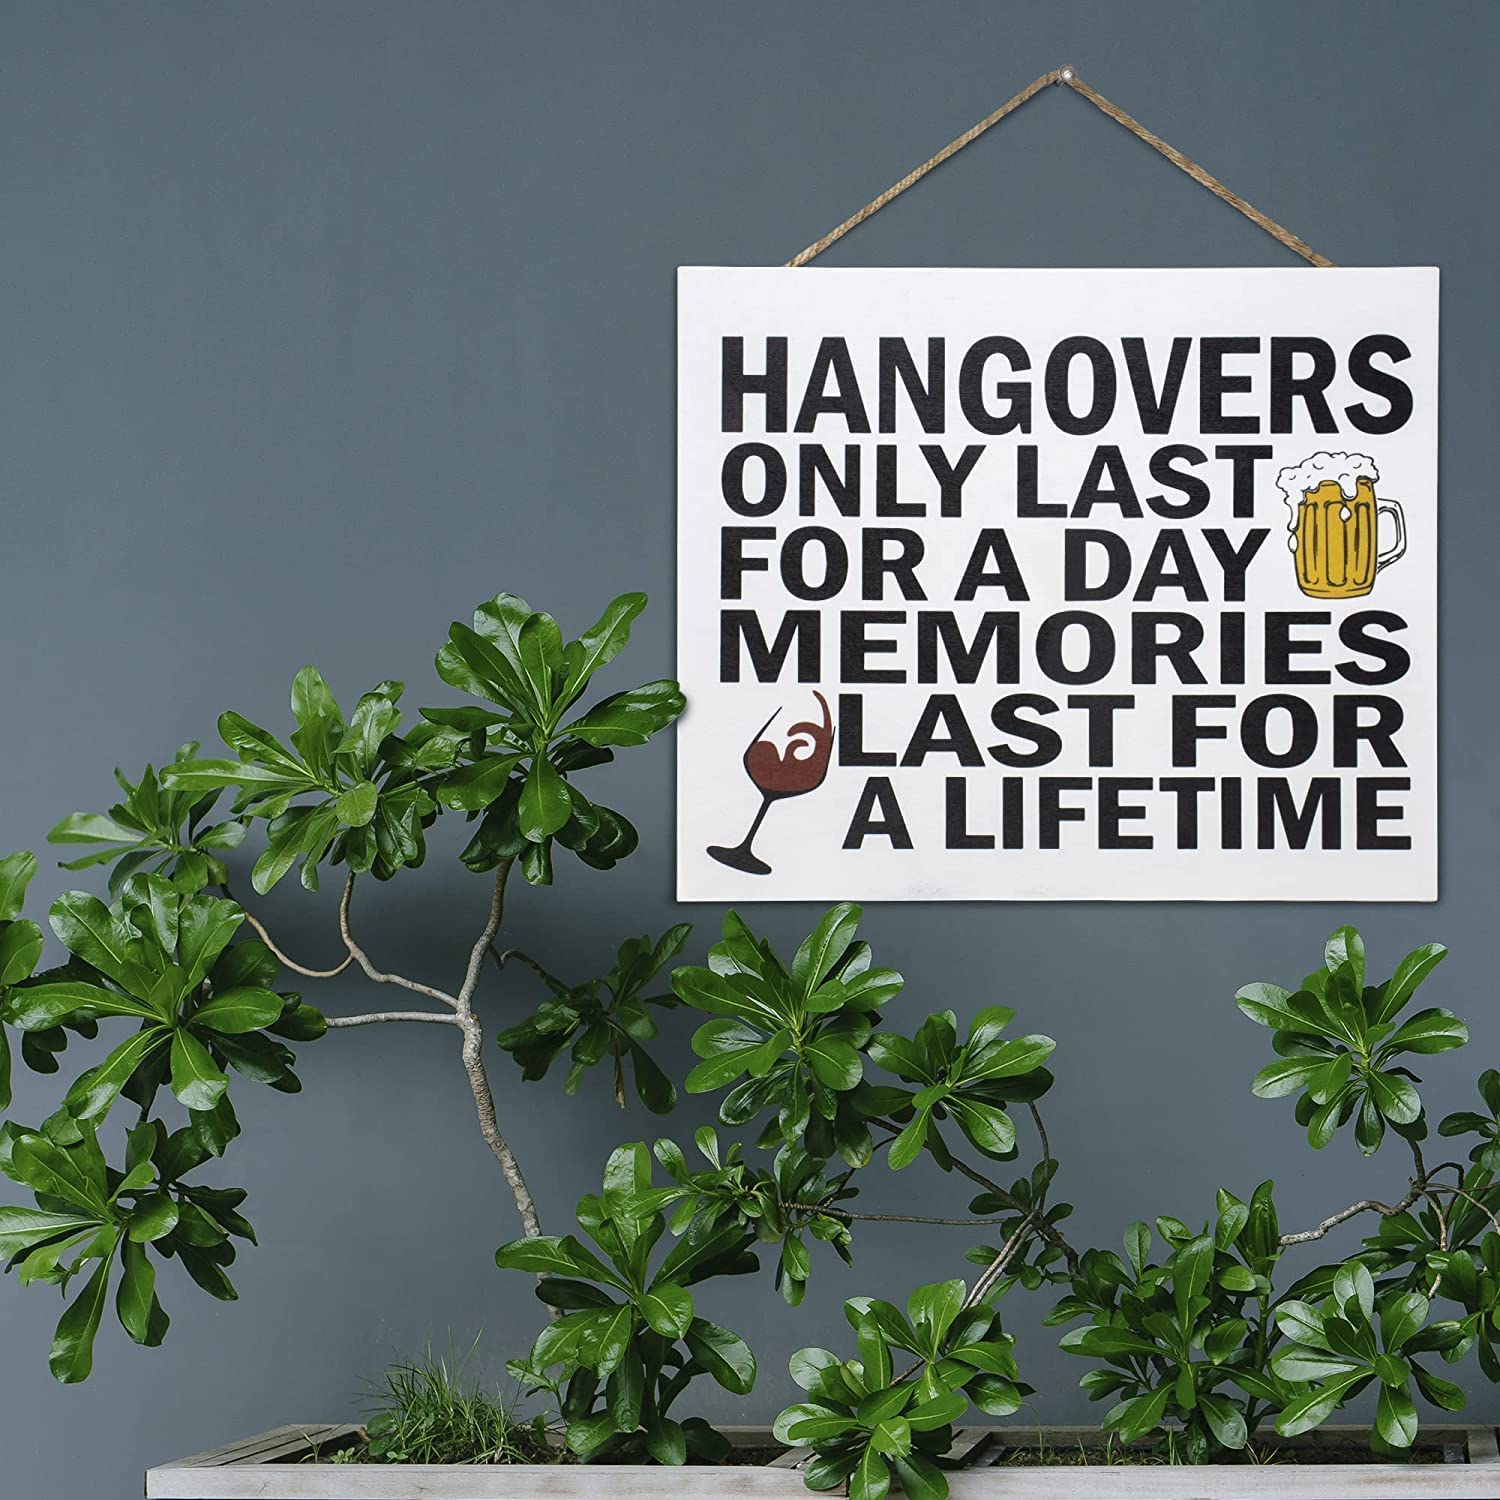 A delightful hanging sign printed on luxurious wood